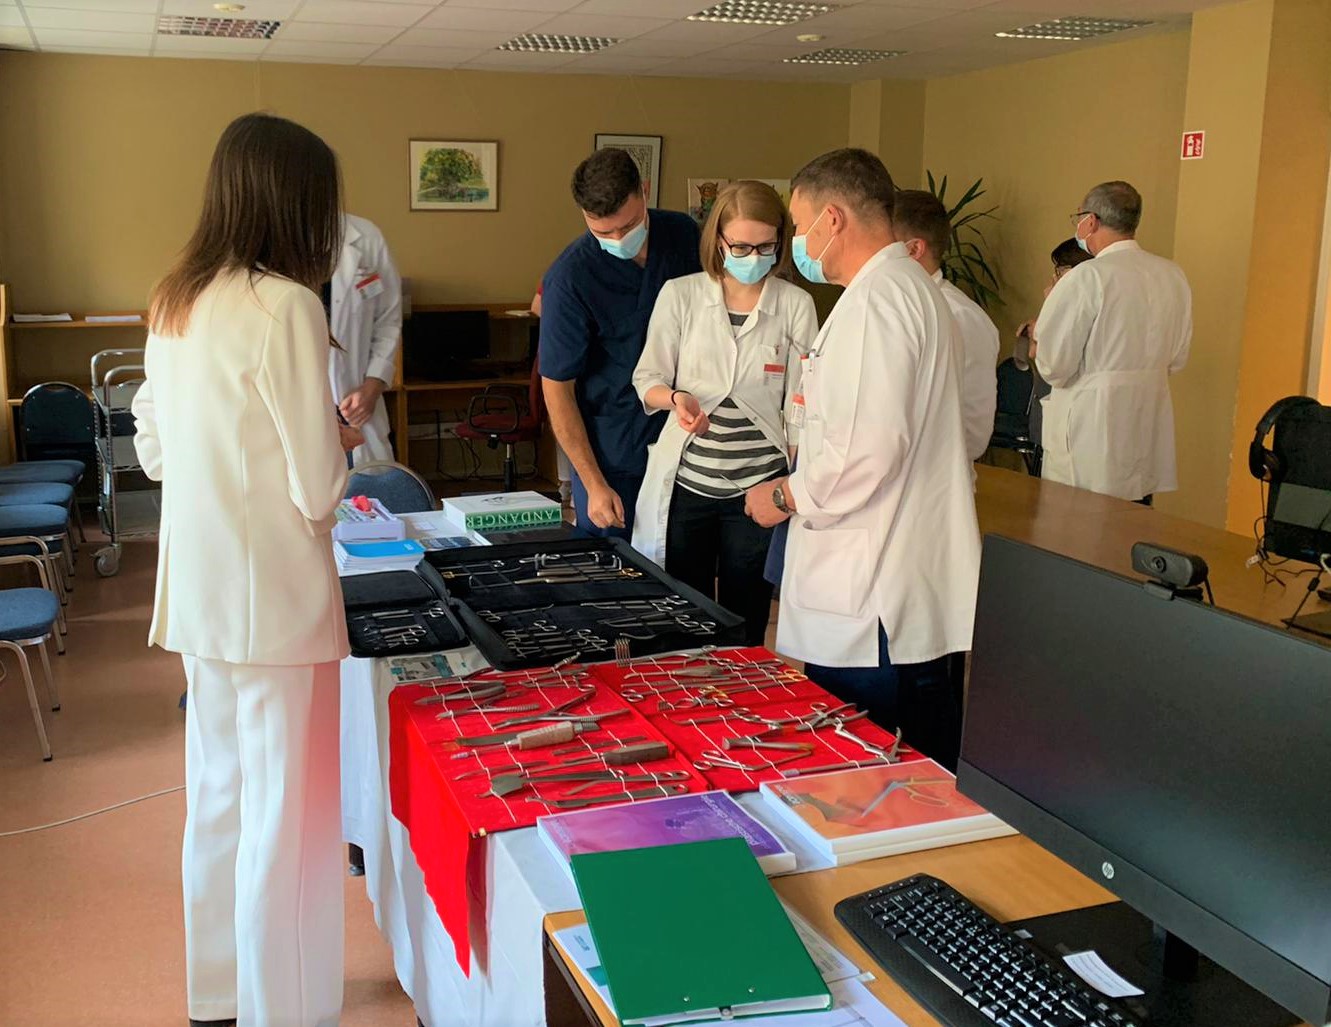 Sales Manager Toma Tylenytė presentig surgical instruments to traumatologists and plastic surgeons